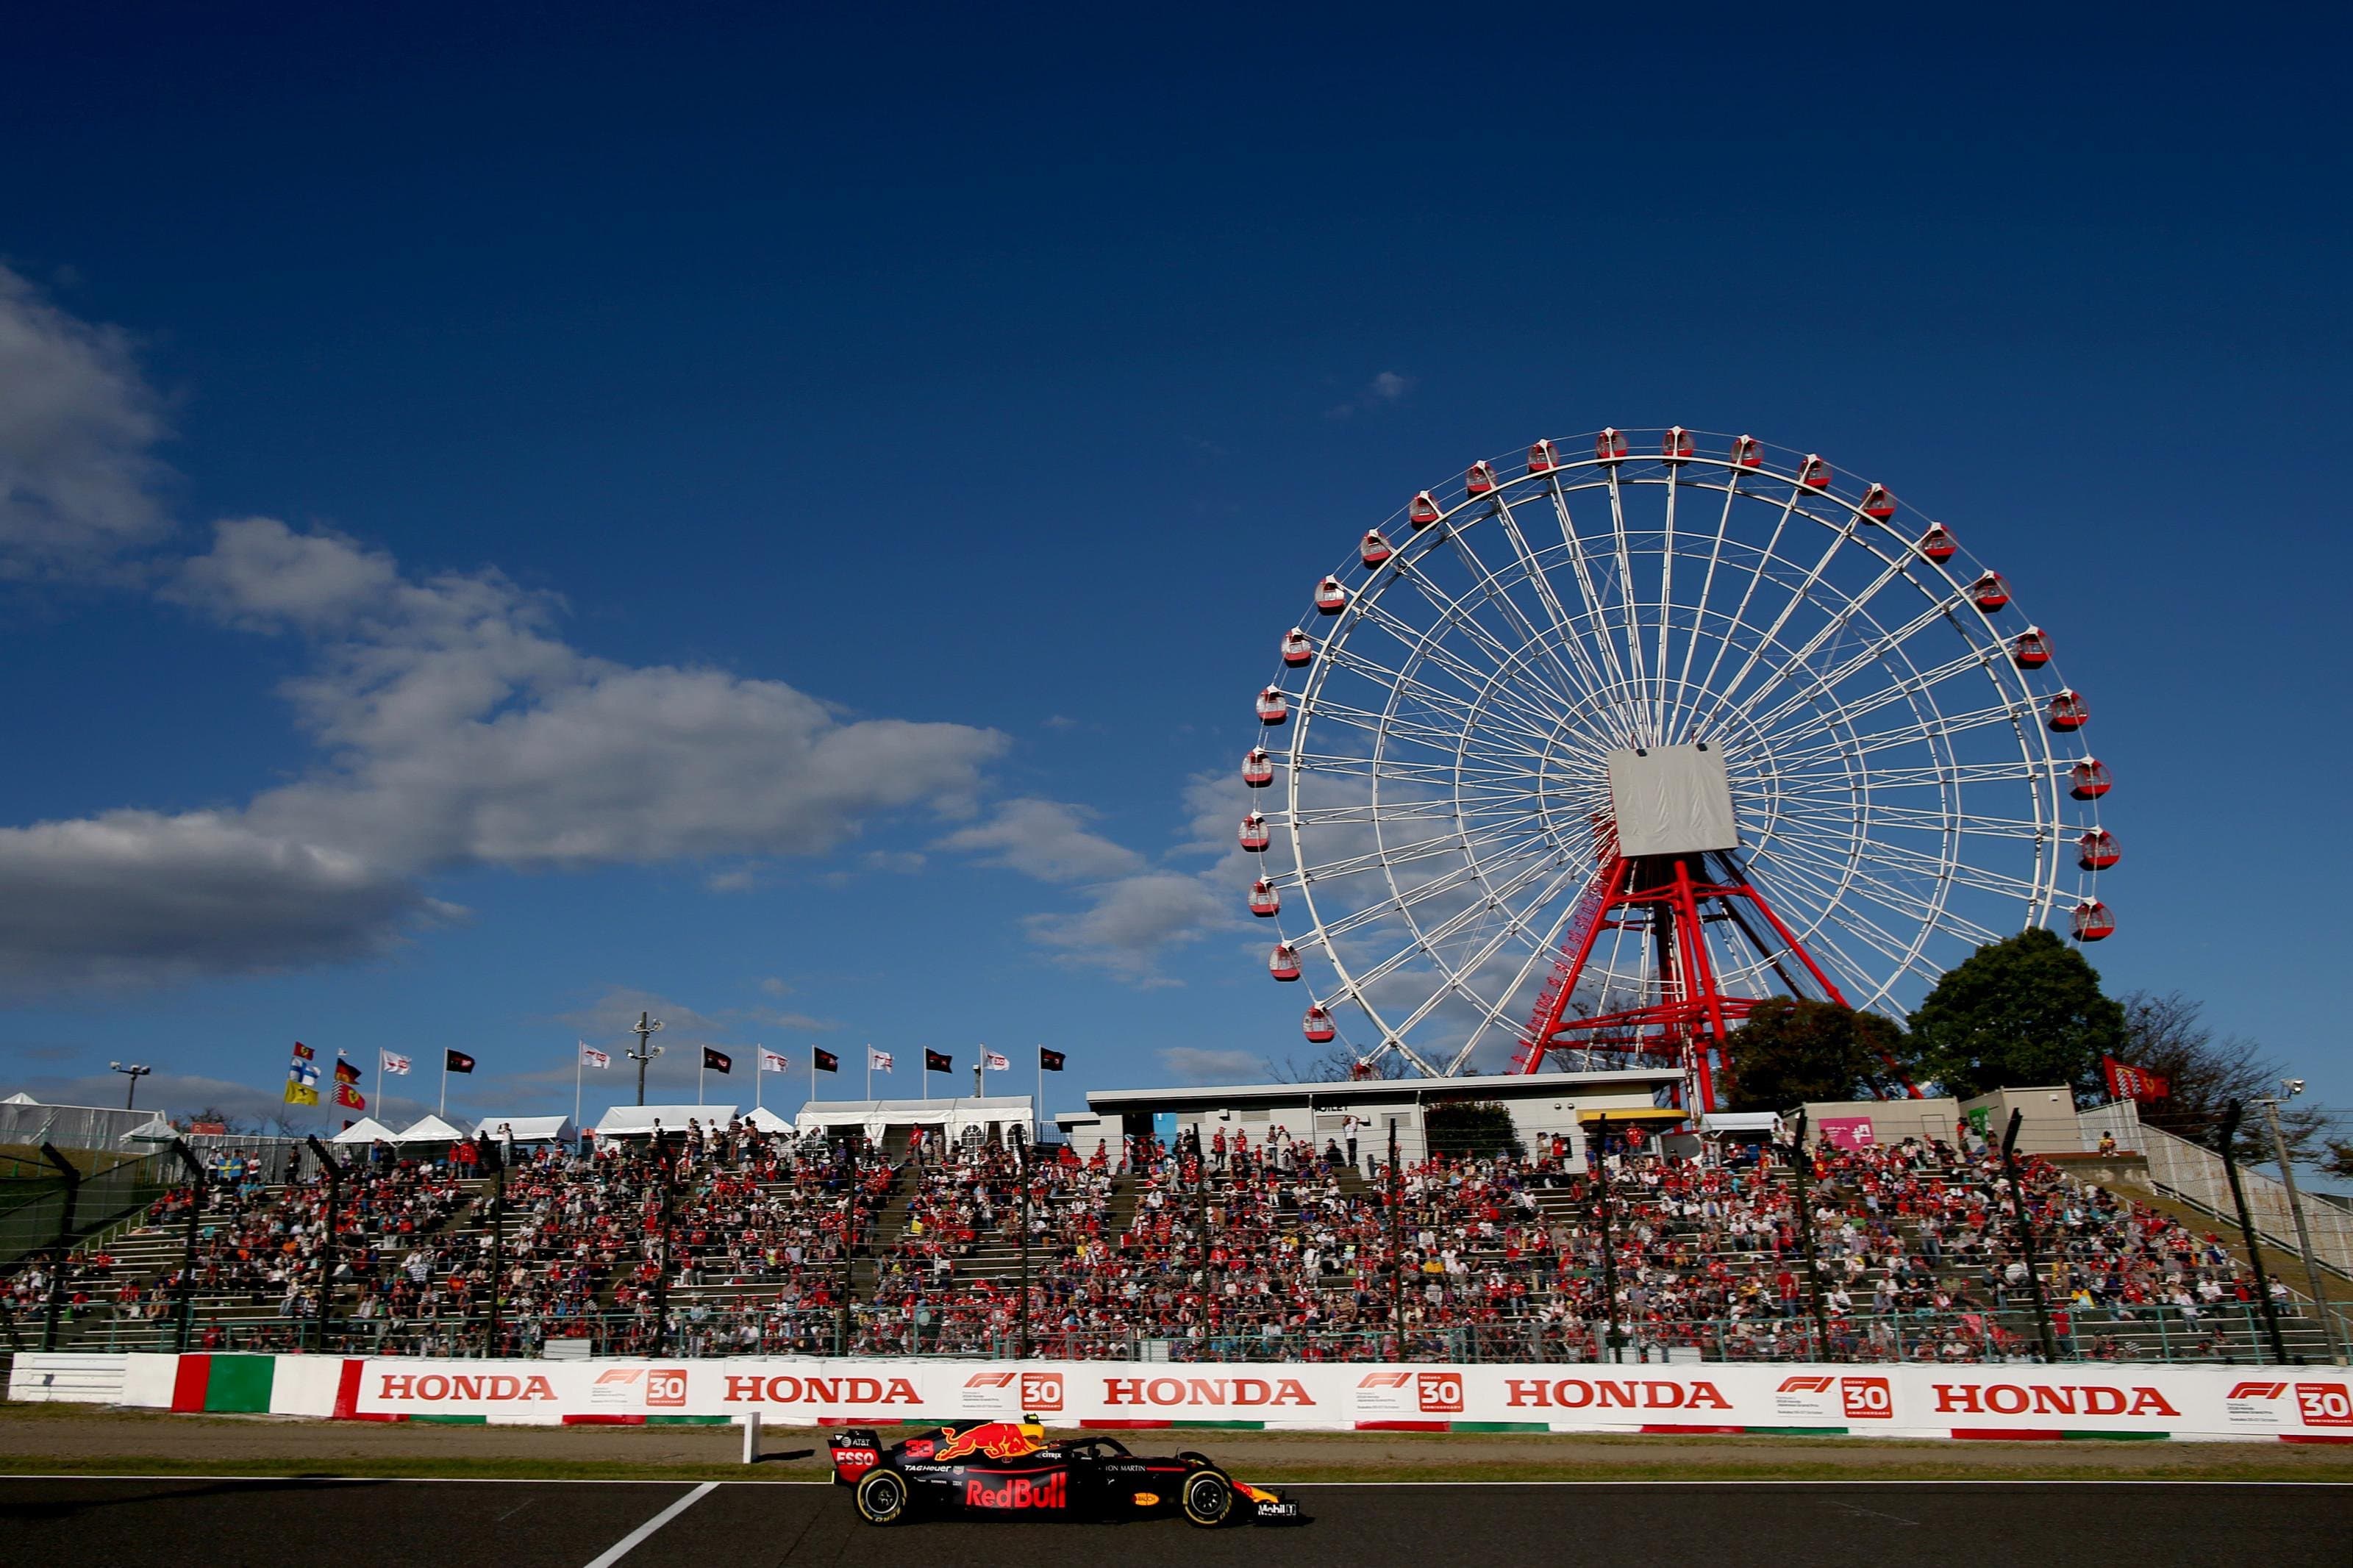 F1 New Season 6 Storylines To Watch For In 19